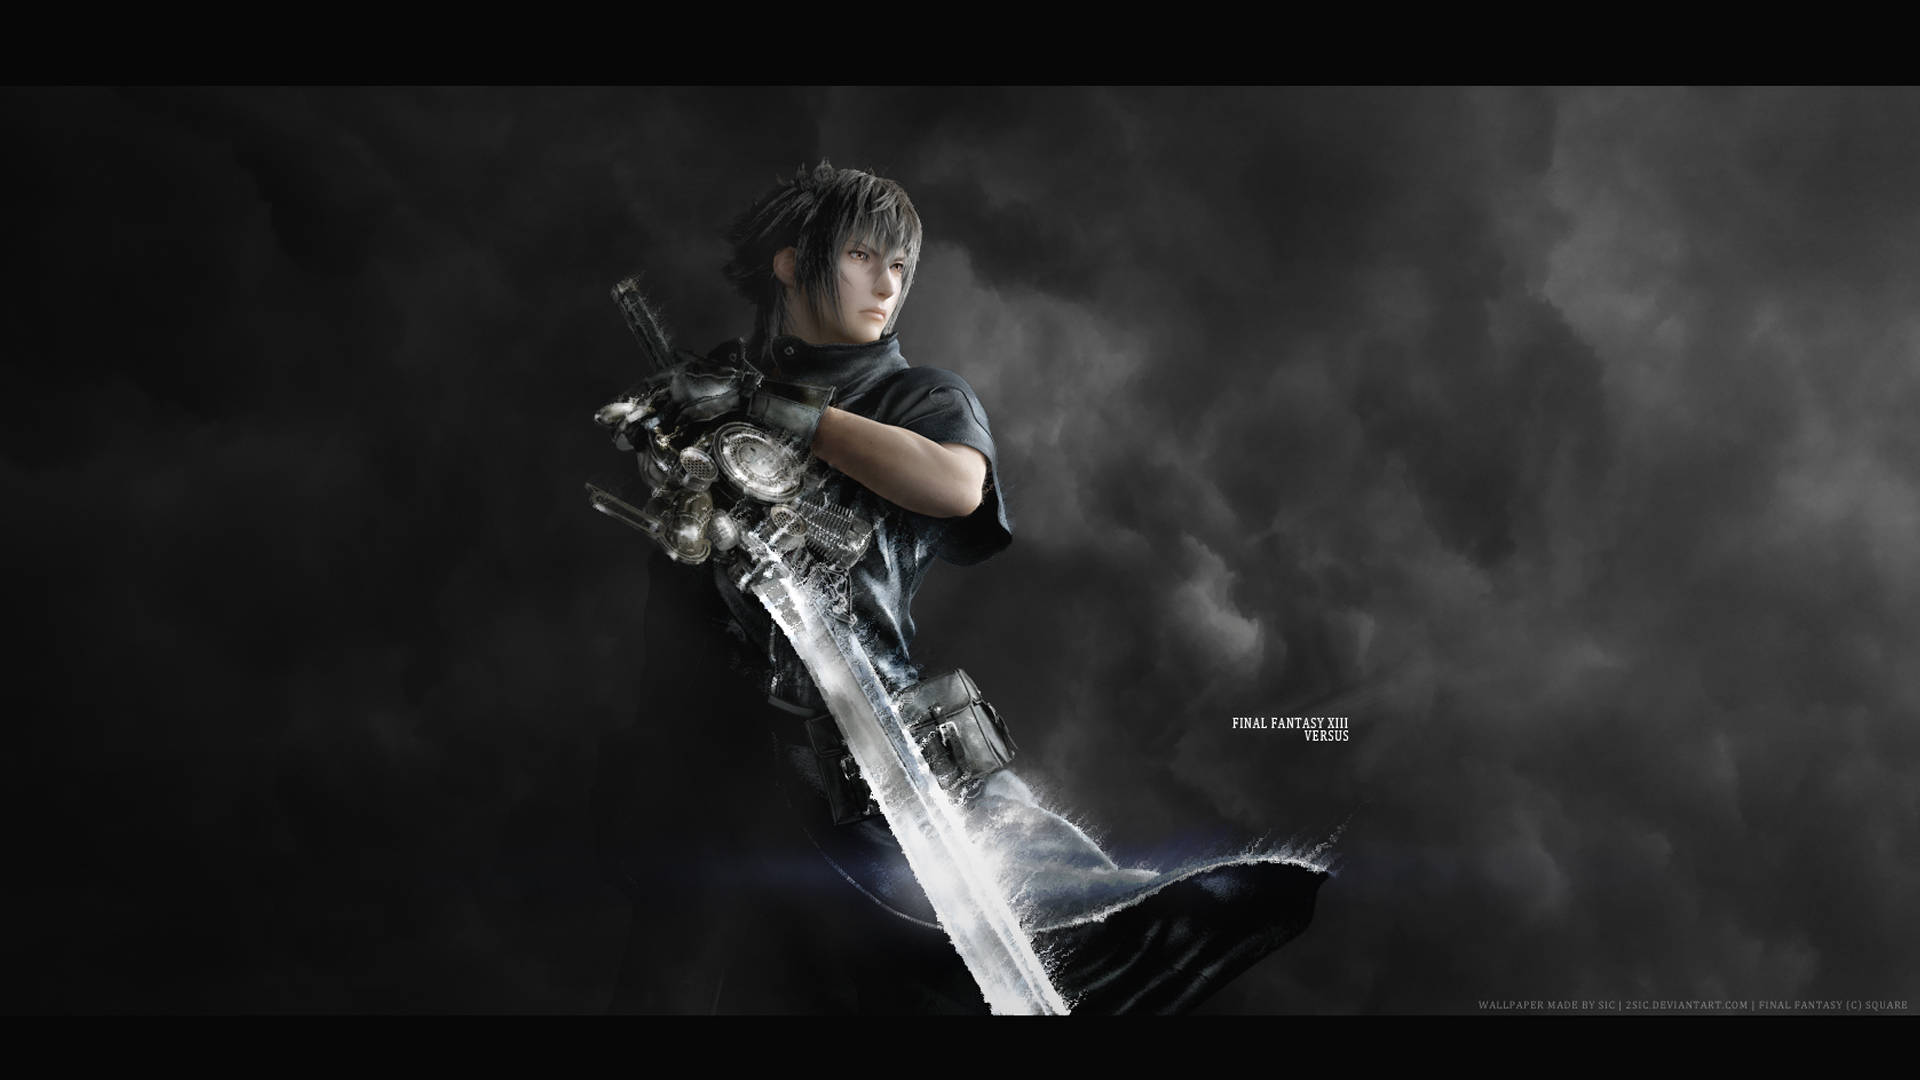 "Noctis Lucis Caelum Wielding the Engine Blade in Final Fantasy XV" Wallpaper